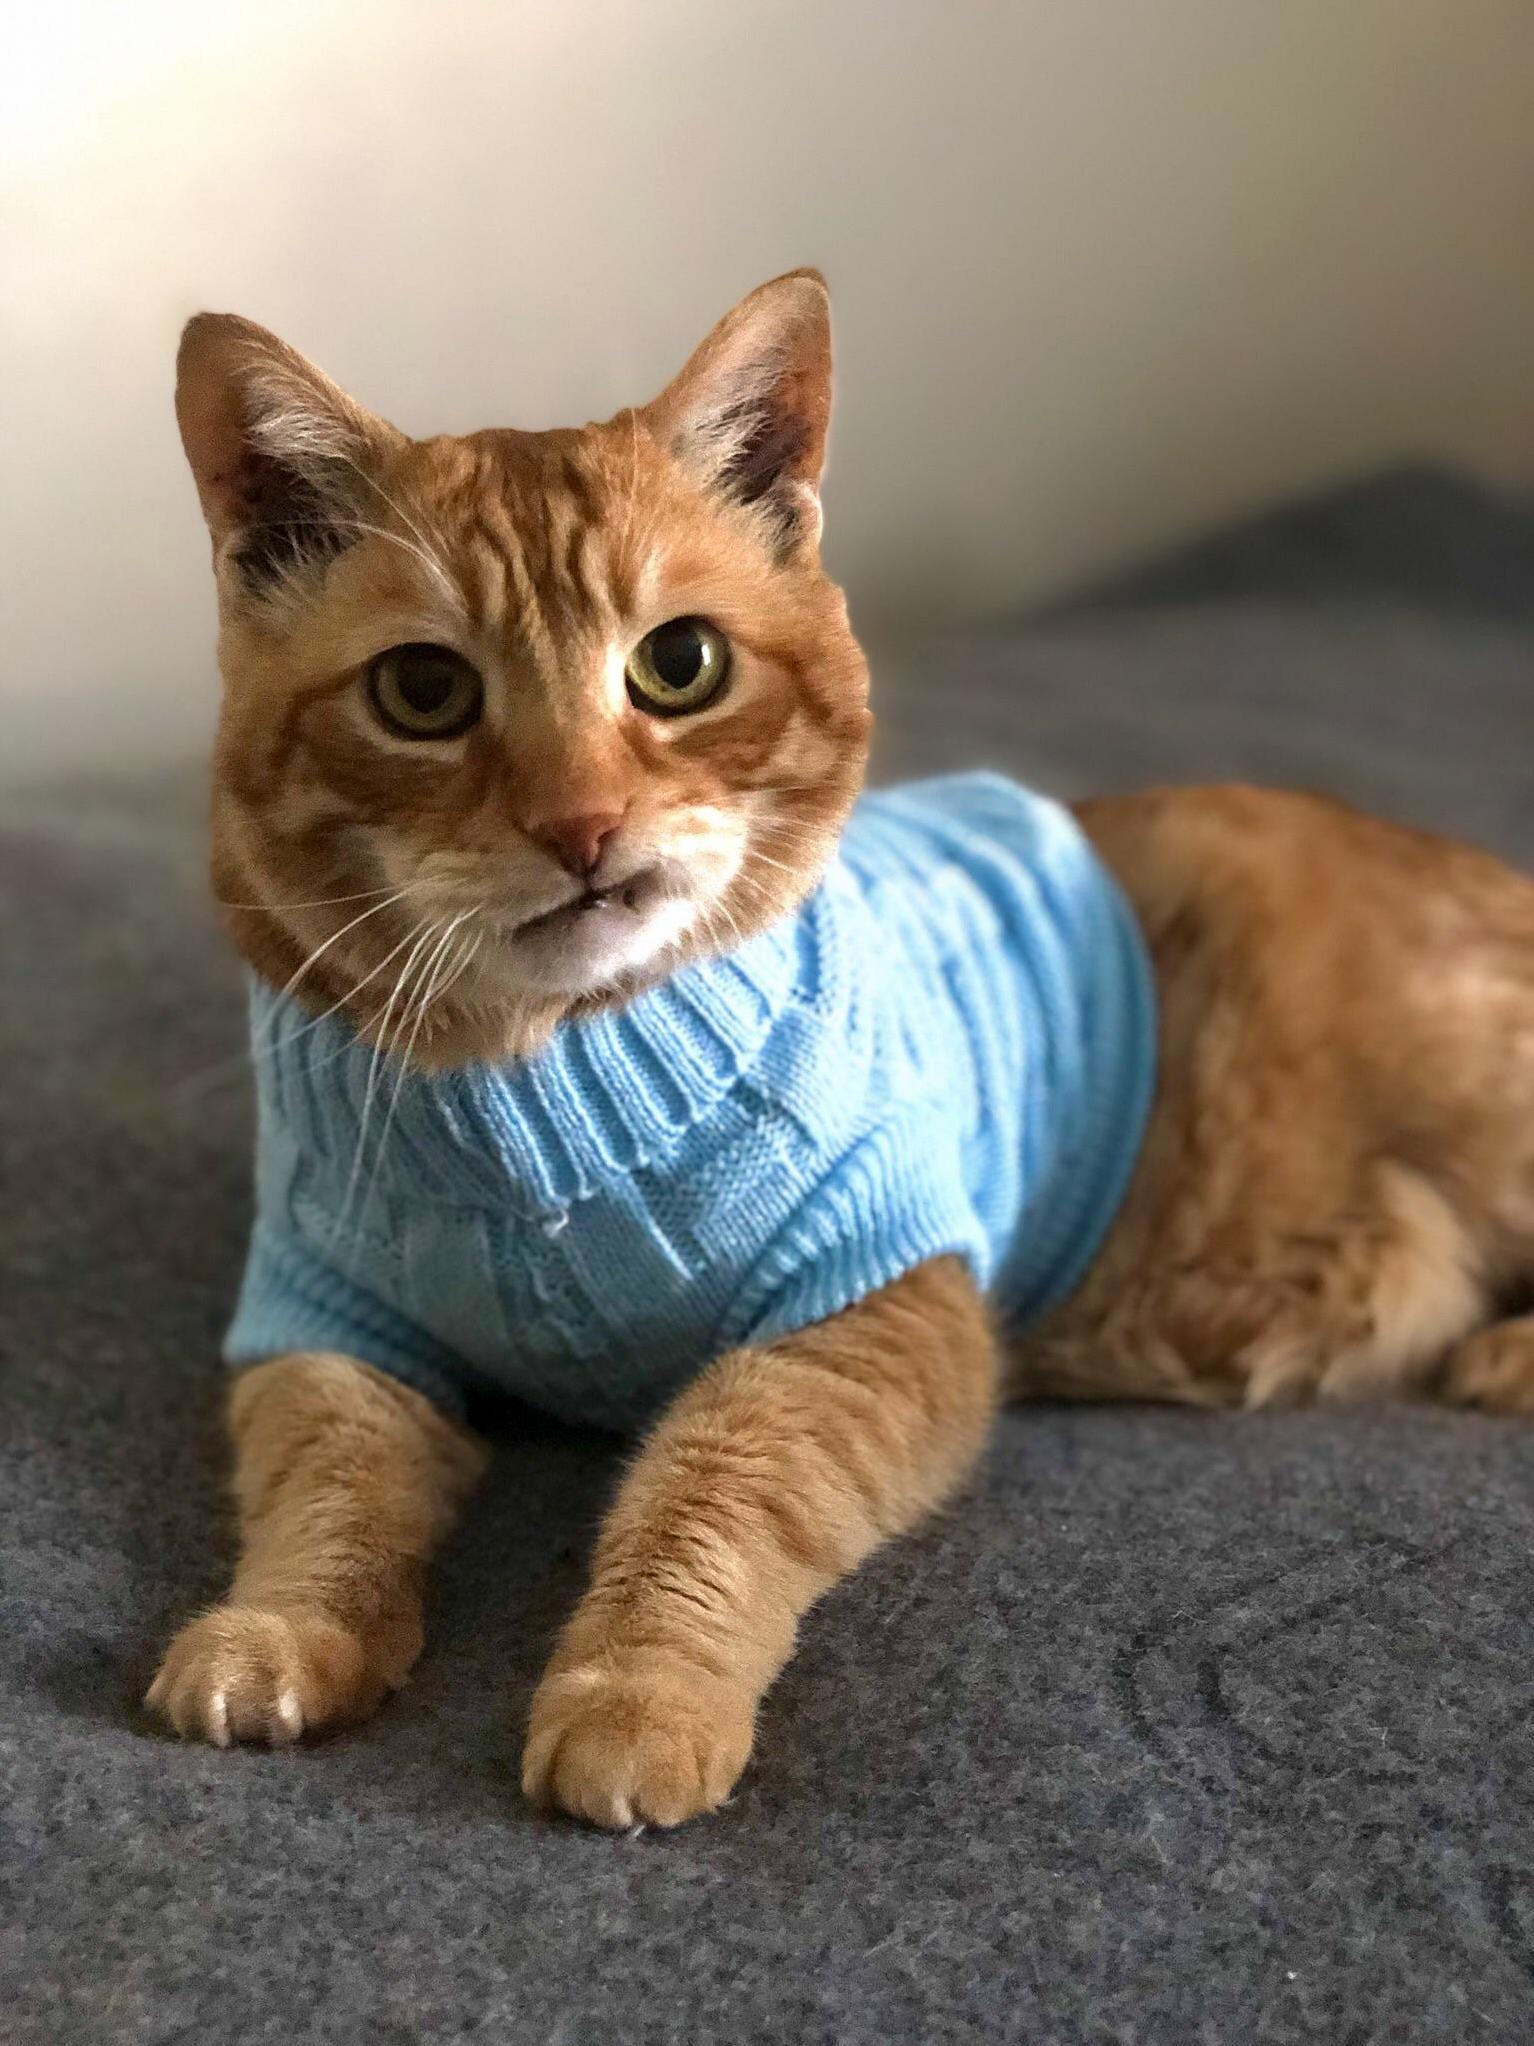 My roommates cat was rocking a sweater today.